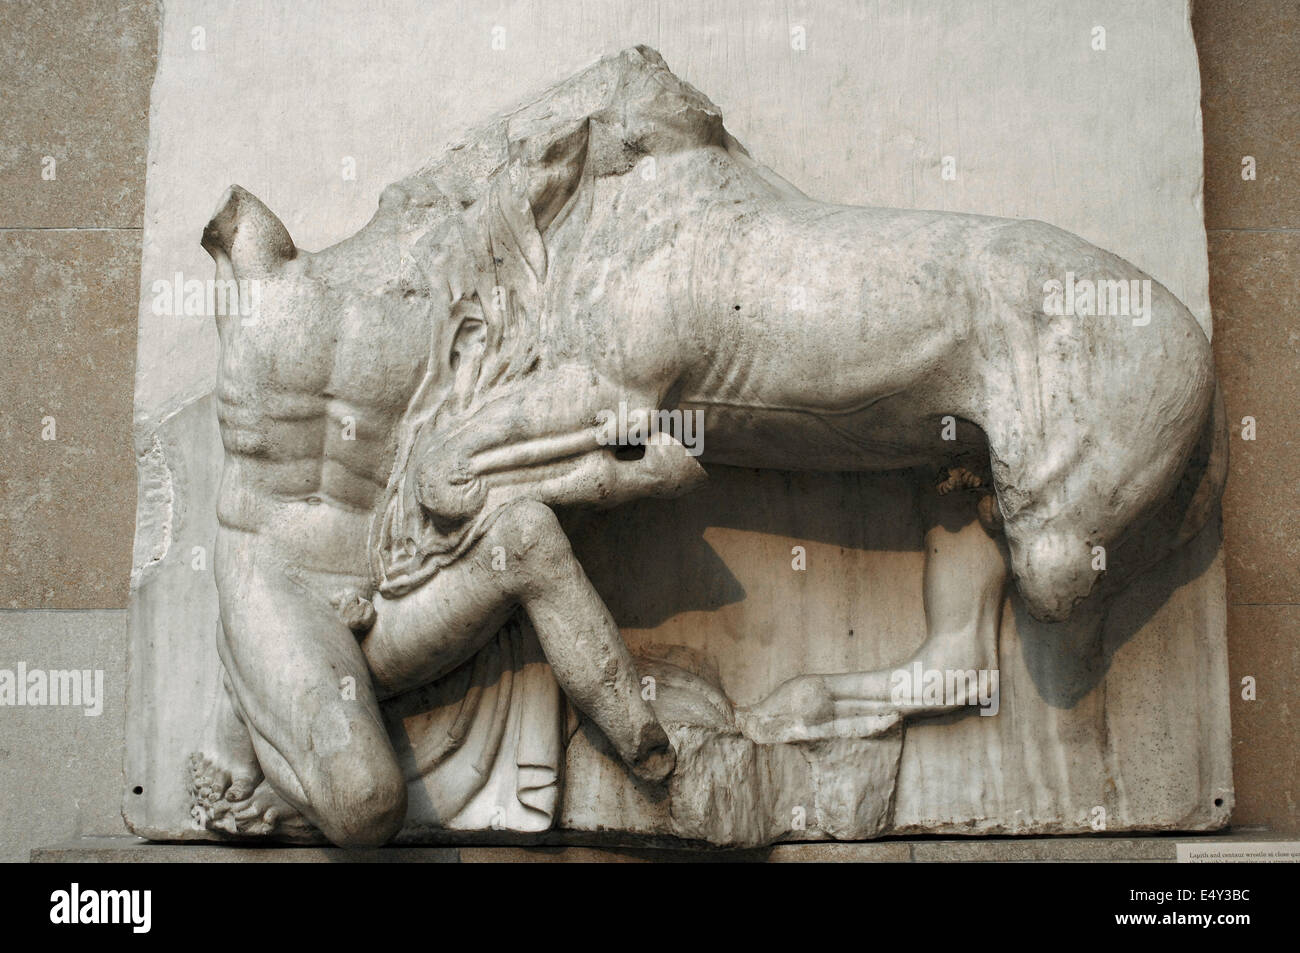 Metope VIII from the Parthenon marbles depicting part of the battle between the Centaurs and the Lapiths. 5th century BC. Athens Stock Photo